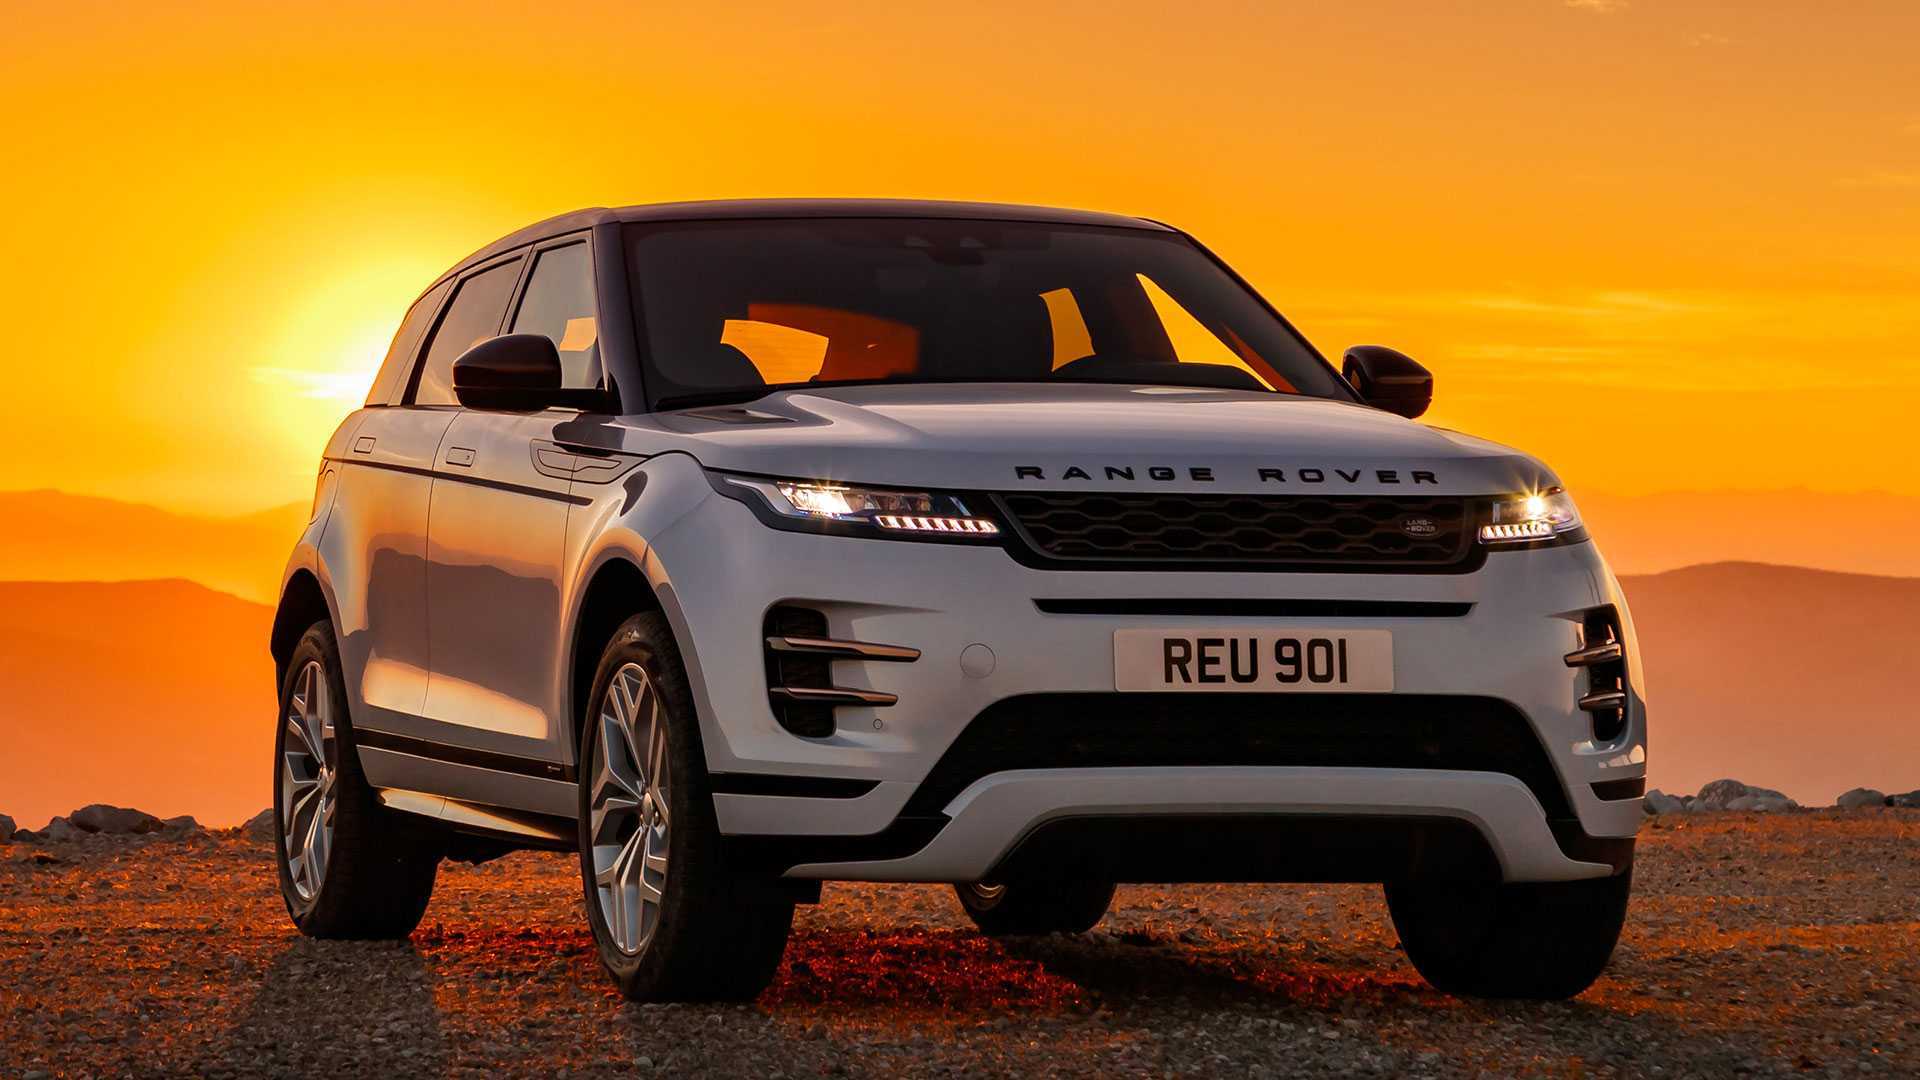 2020 Land Rover Range Rover Evoque First Drive: Slow And Steady Style